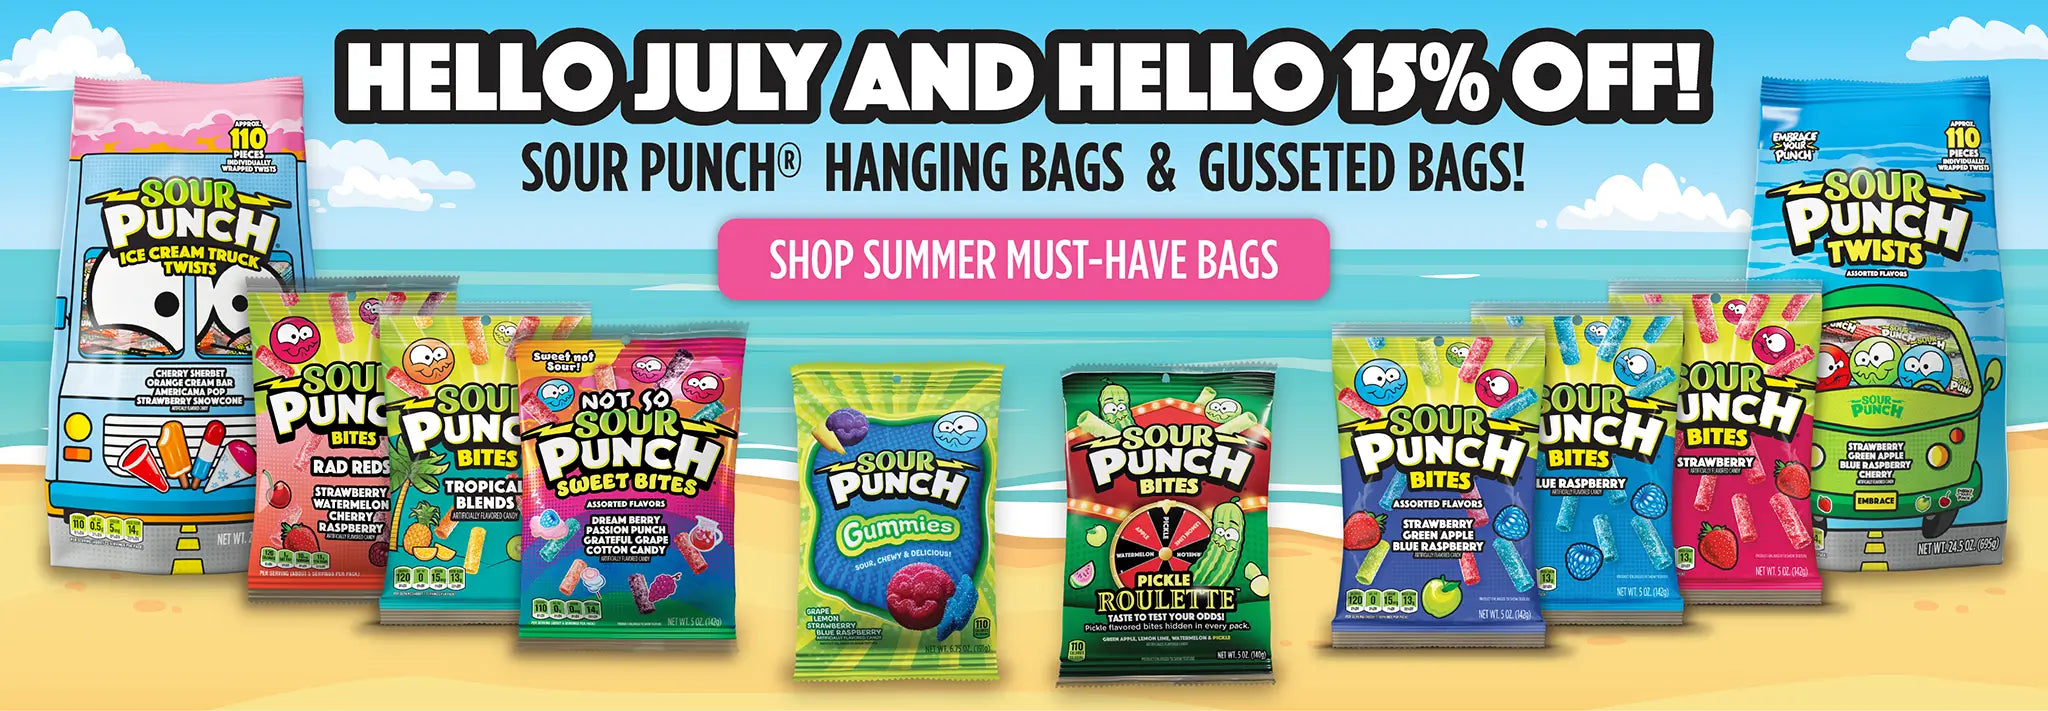 Hello July and Hello 15% Off! Sour Punch Hanging Bags & Gusseted Bags! Shop Summer Must-Have Bags